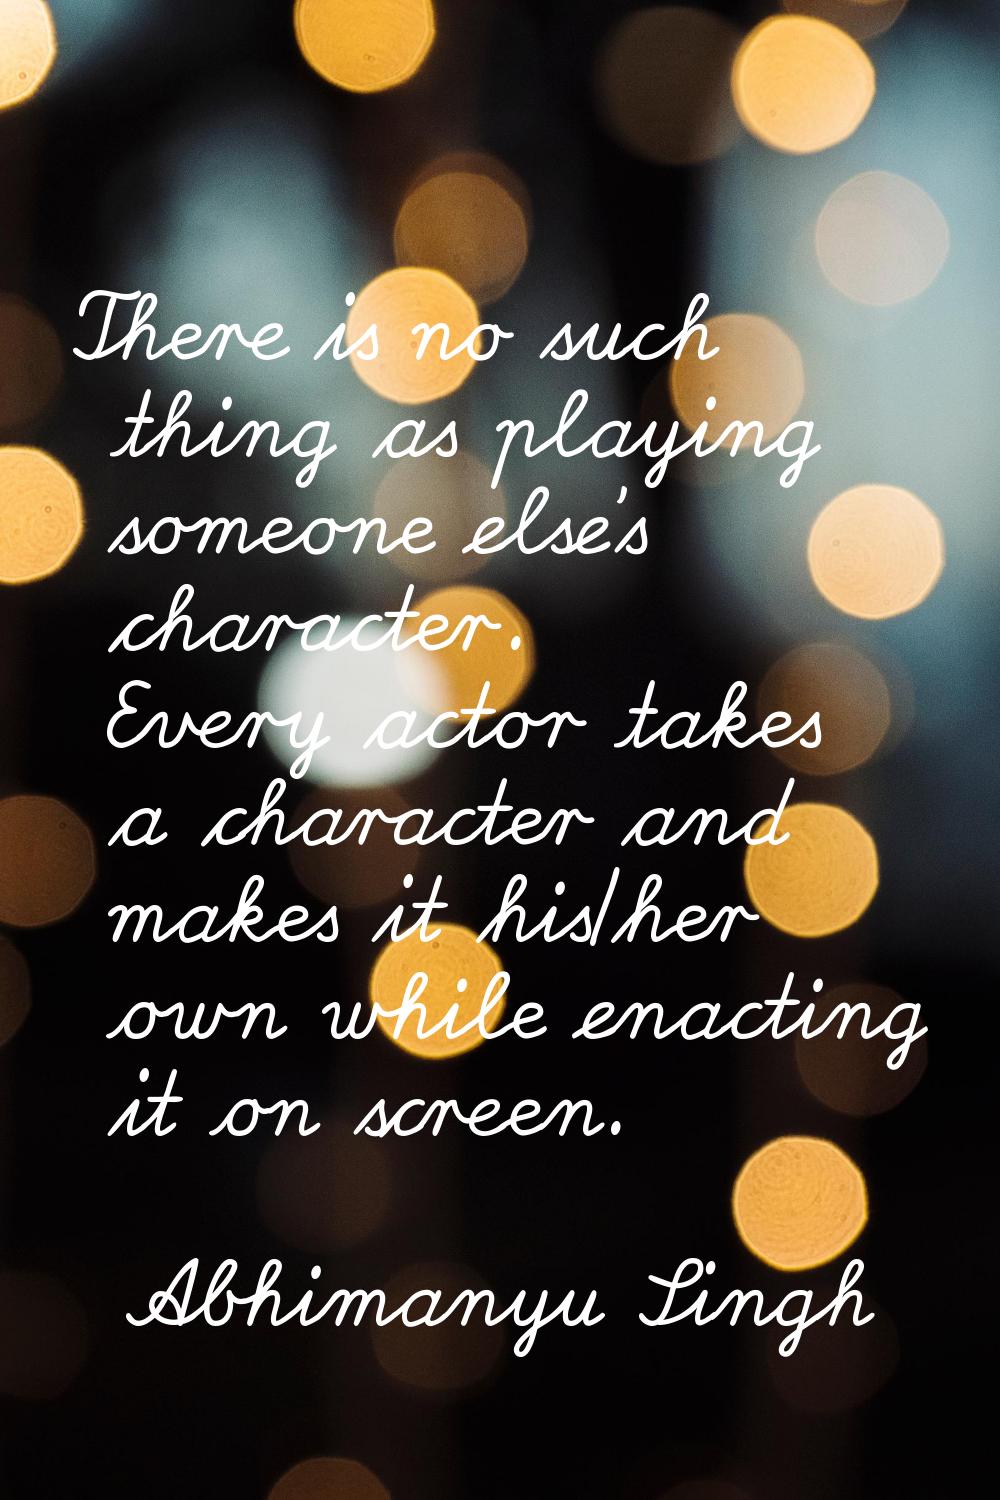 There is no such thing as playing someone else's character. Every actor takes a character and makes